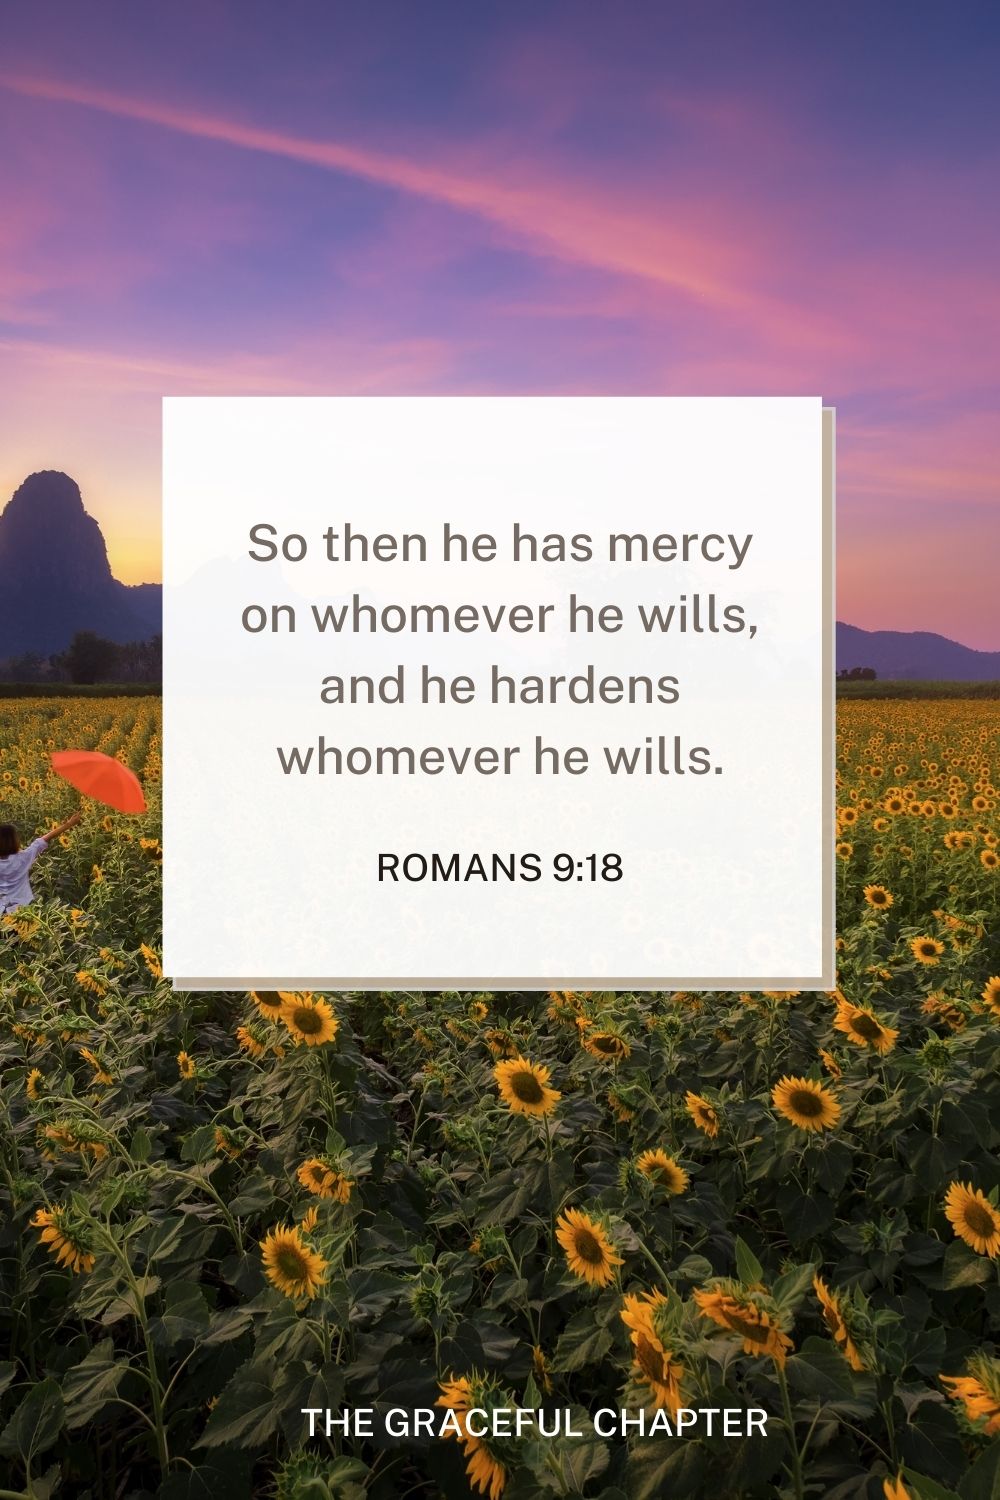 So then he has mercy on whomever he wills, and he hardens whomever he wills. Romans 9:18